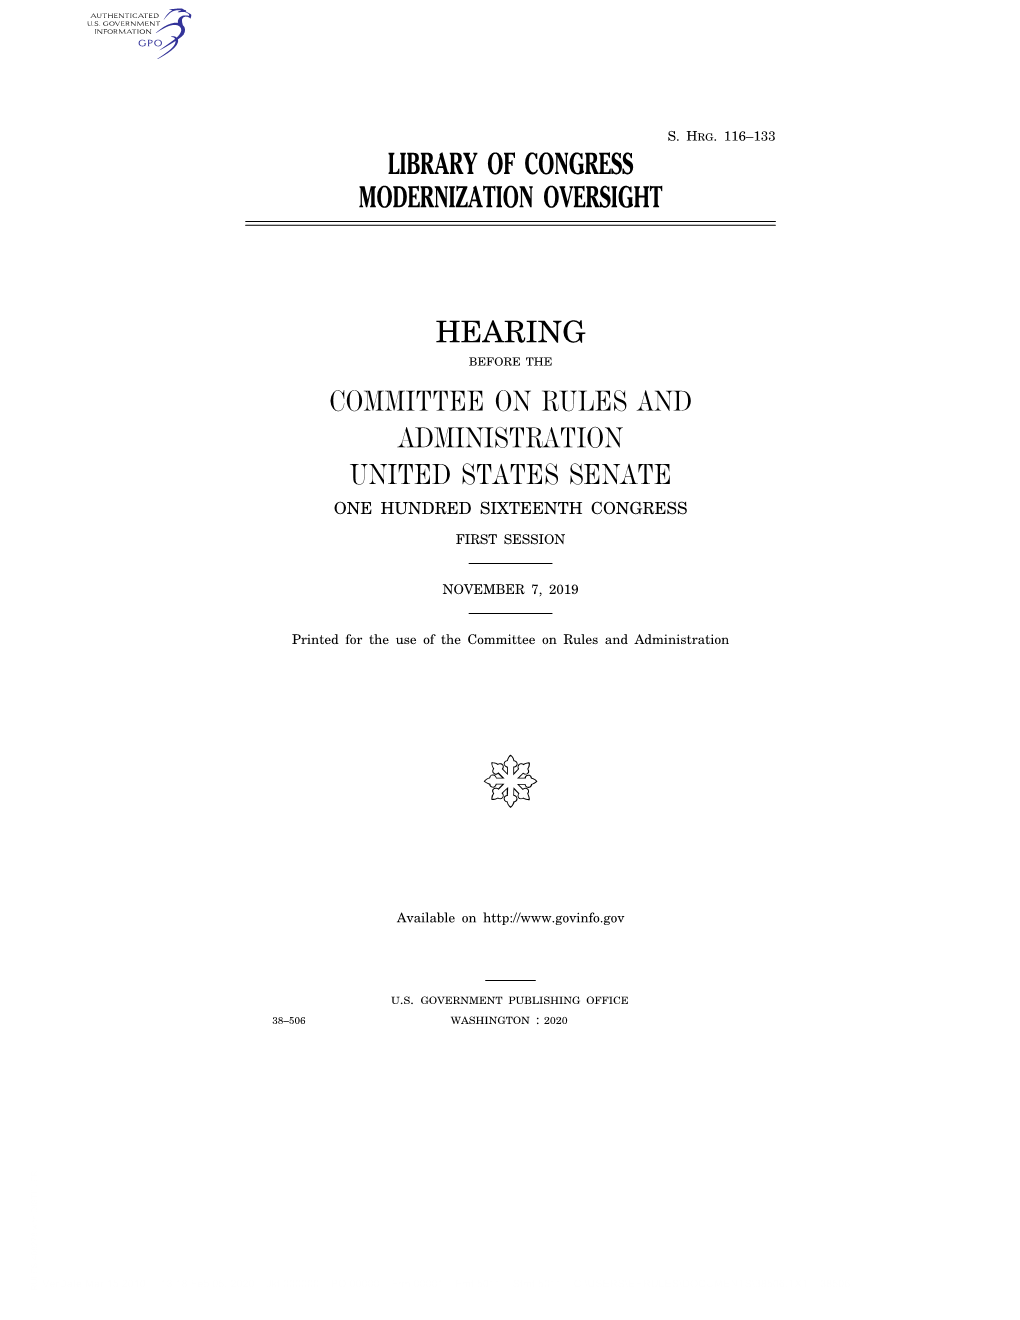 Library of Congress Modernization Oversight Hearing Committee on Rules and Administration United States Senate